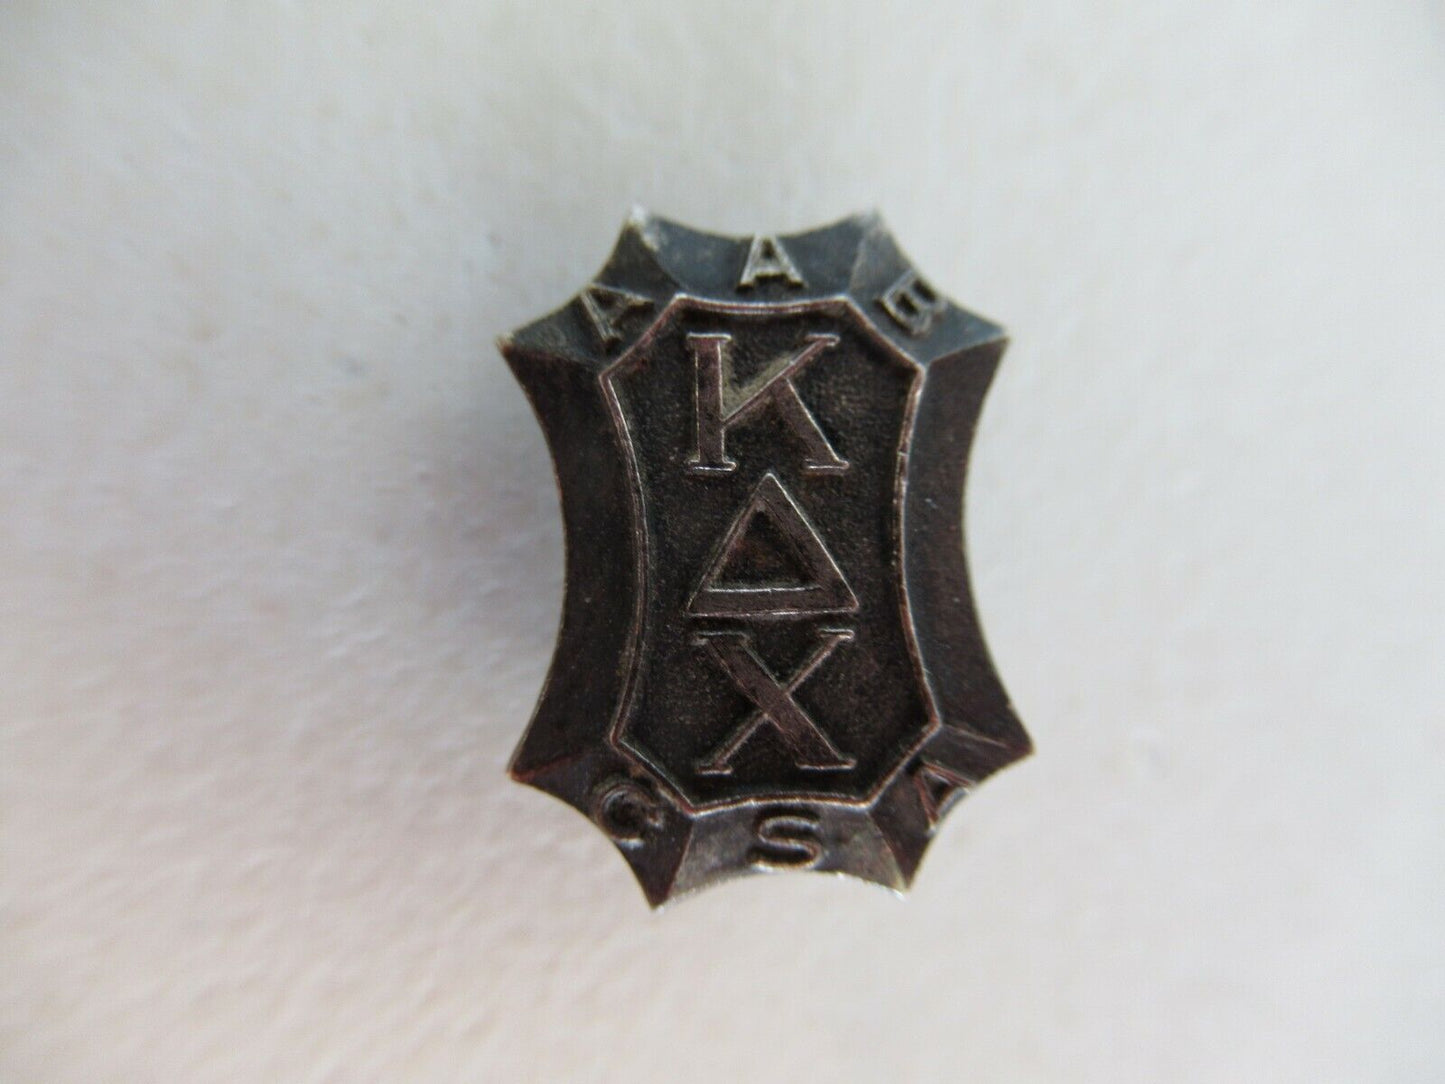 USA FRATERNITY PIN KAPPA DELTA CHI. MADE IN SILVER. 813